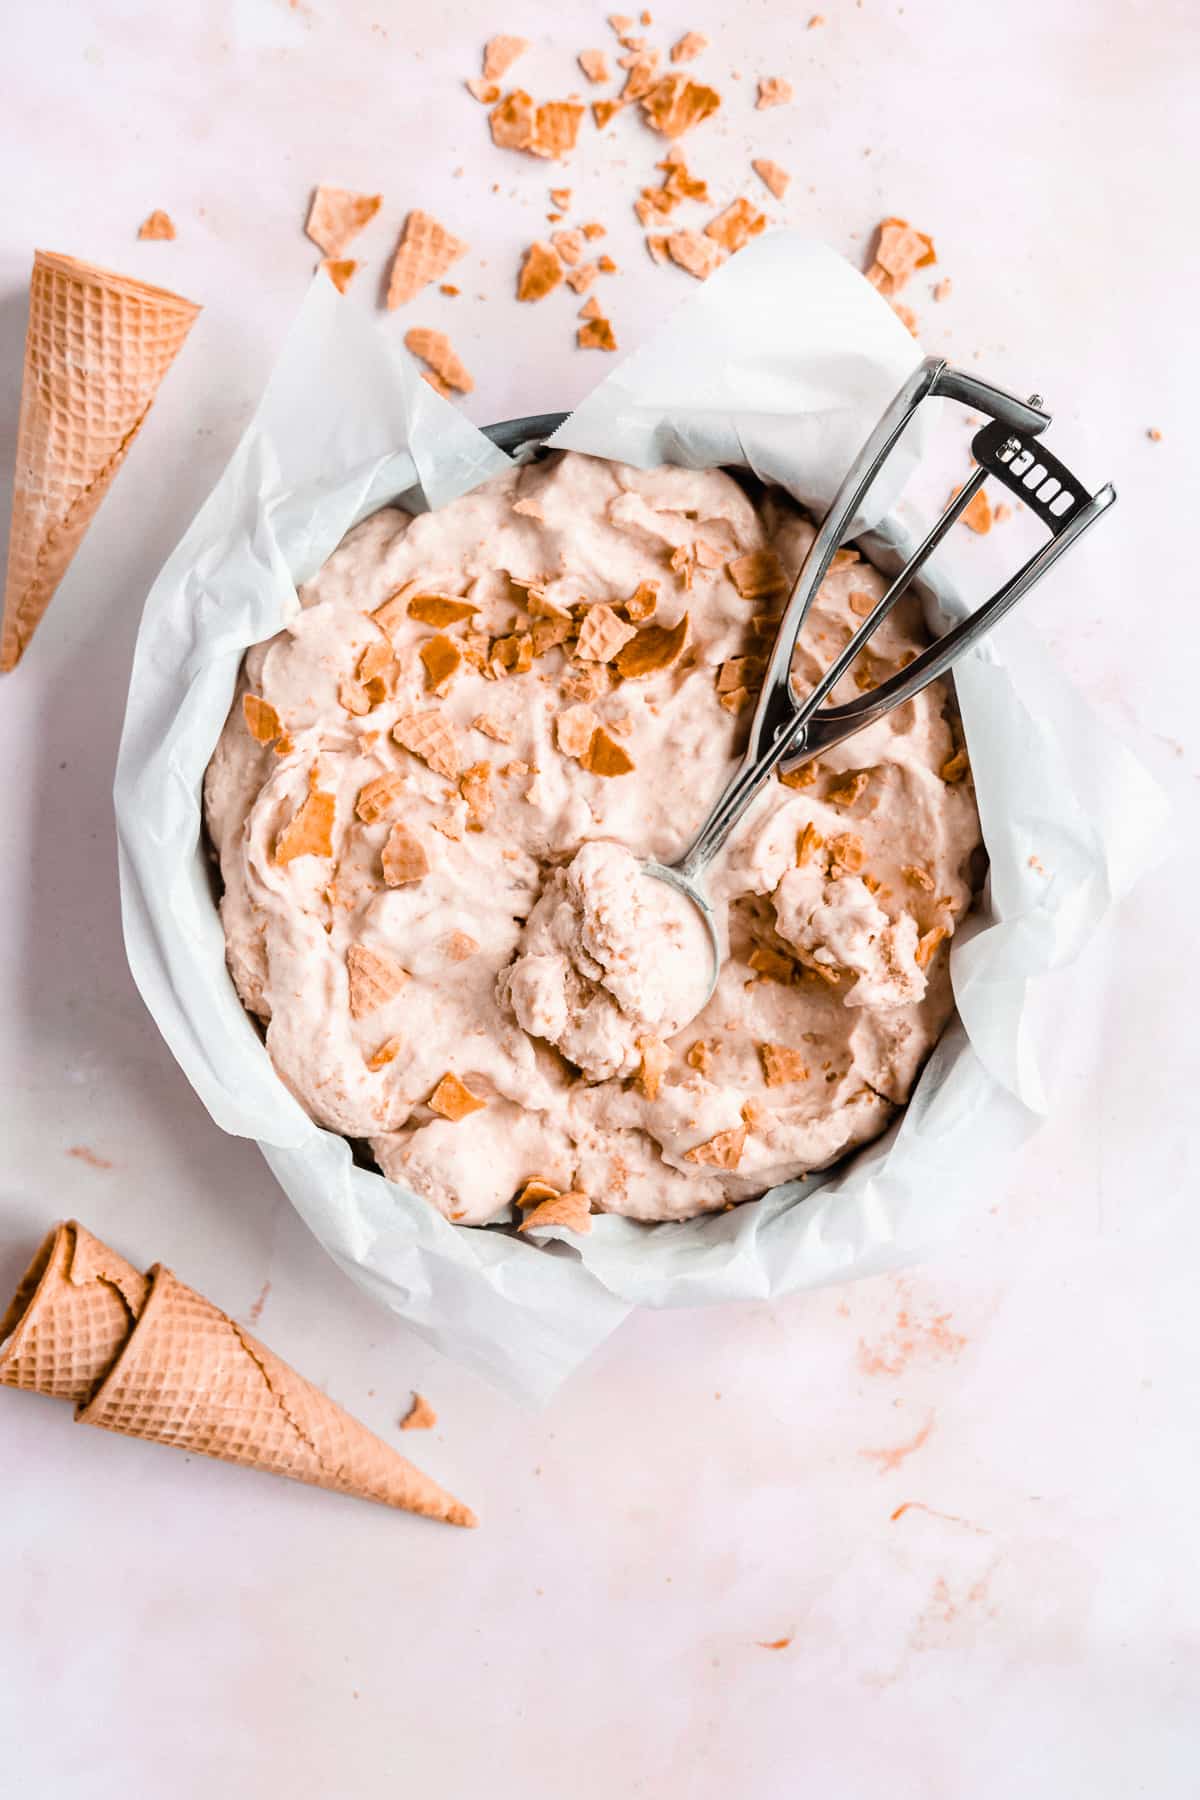 Overhead image of Homemade Vegan Peach Ice Cream on a marble slab with an ice cream scoop filled with delicious ice cream.  Several  cones are laying nearby.  